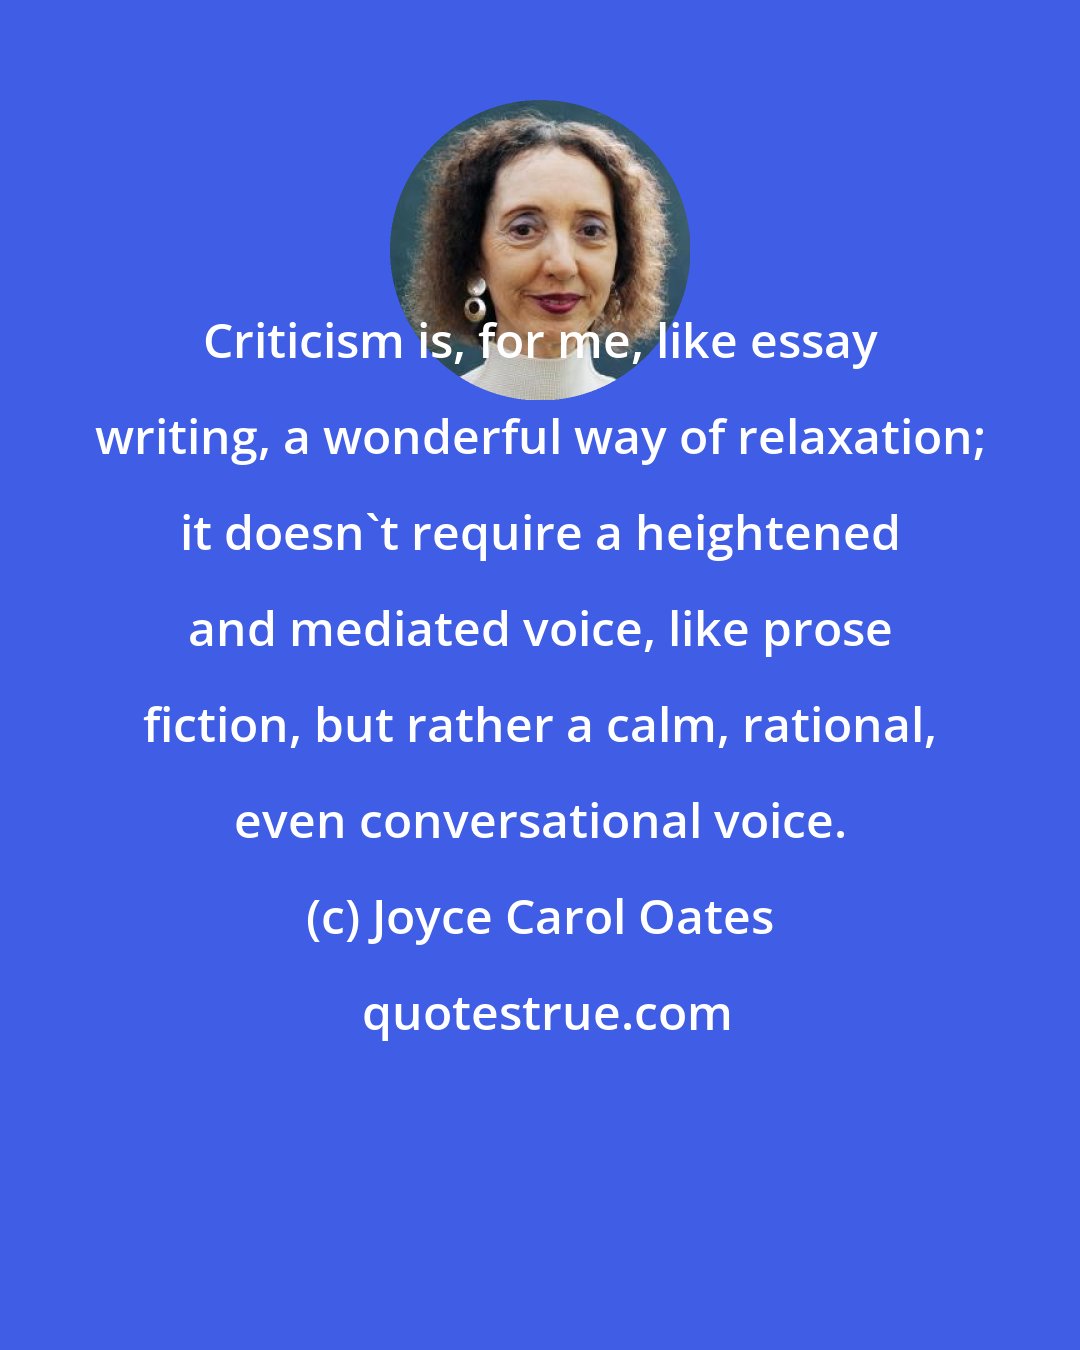 Joyce Carol Oates: Criticism is, for me, like essay writing, a wonderful way of relaxation; it doesn't require a heightened and mediated voice, like prose fiction, but rather a calm, rational, even conversational voice.